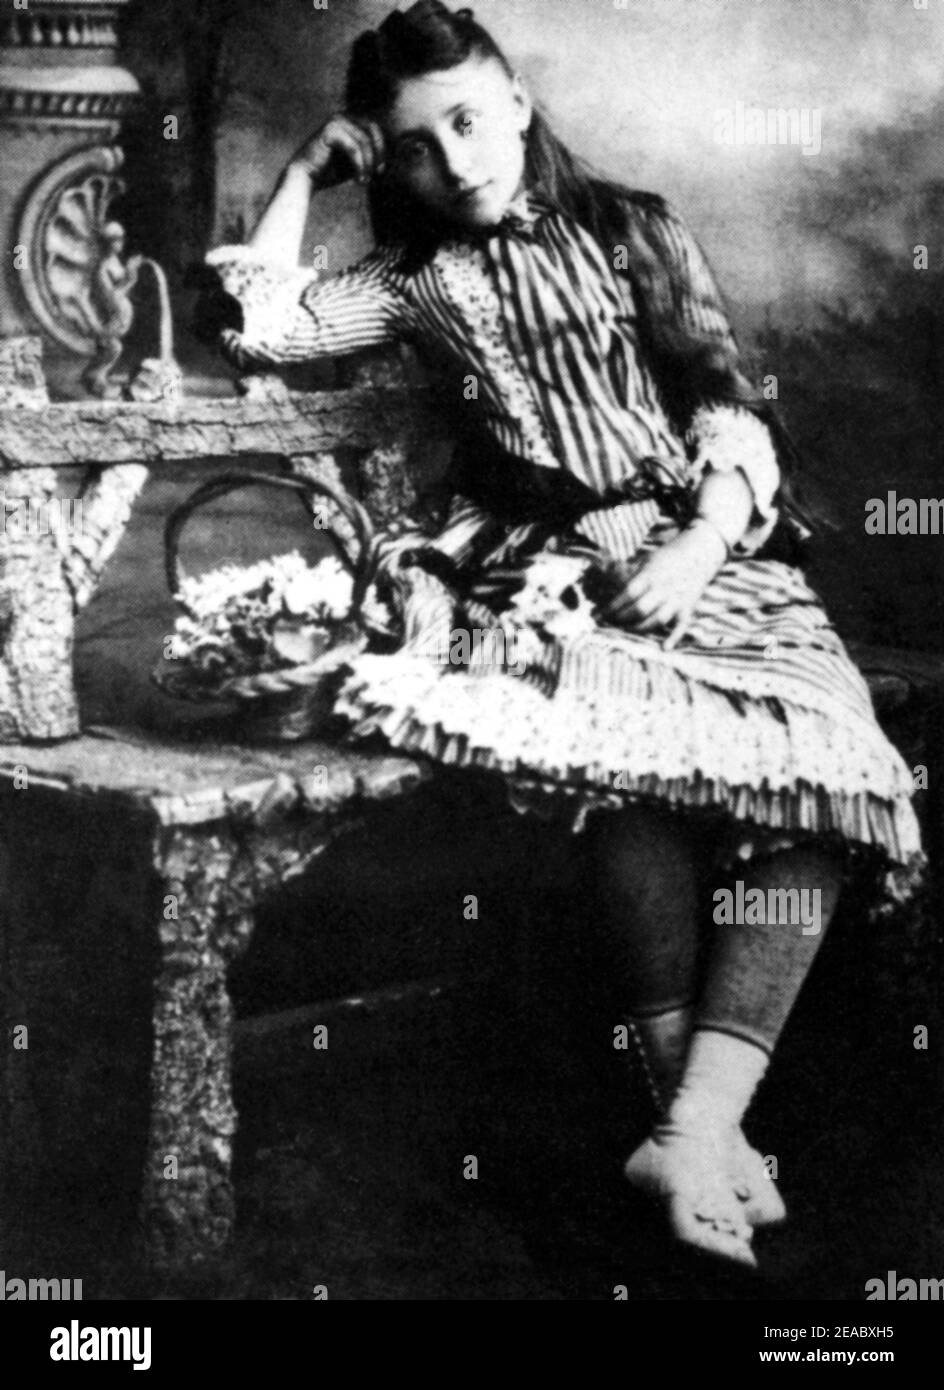 1886 , FRANCE  : The celebrated french woman writer  COLETTE  Willy ( 1873 - 1954 )  when was a little girl  of 13 years old - SCRITTRICE - SCRITTORE - LETTERATO - LITERATURE - LETTERATURA -  personality personalities when was young baby - celebrità  personalità da giovani bambini bambino  - portrait - ritratto ----  Archivio GBB Stock Photo